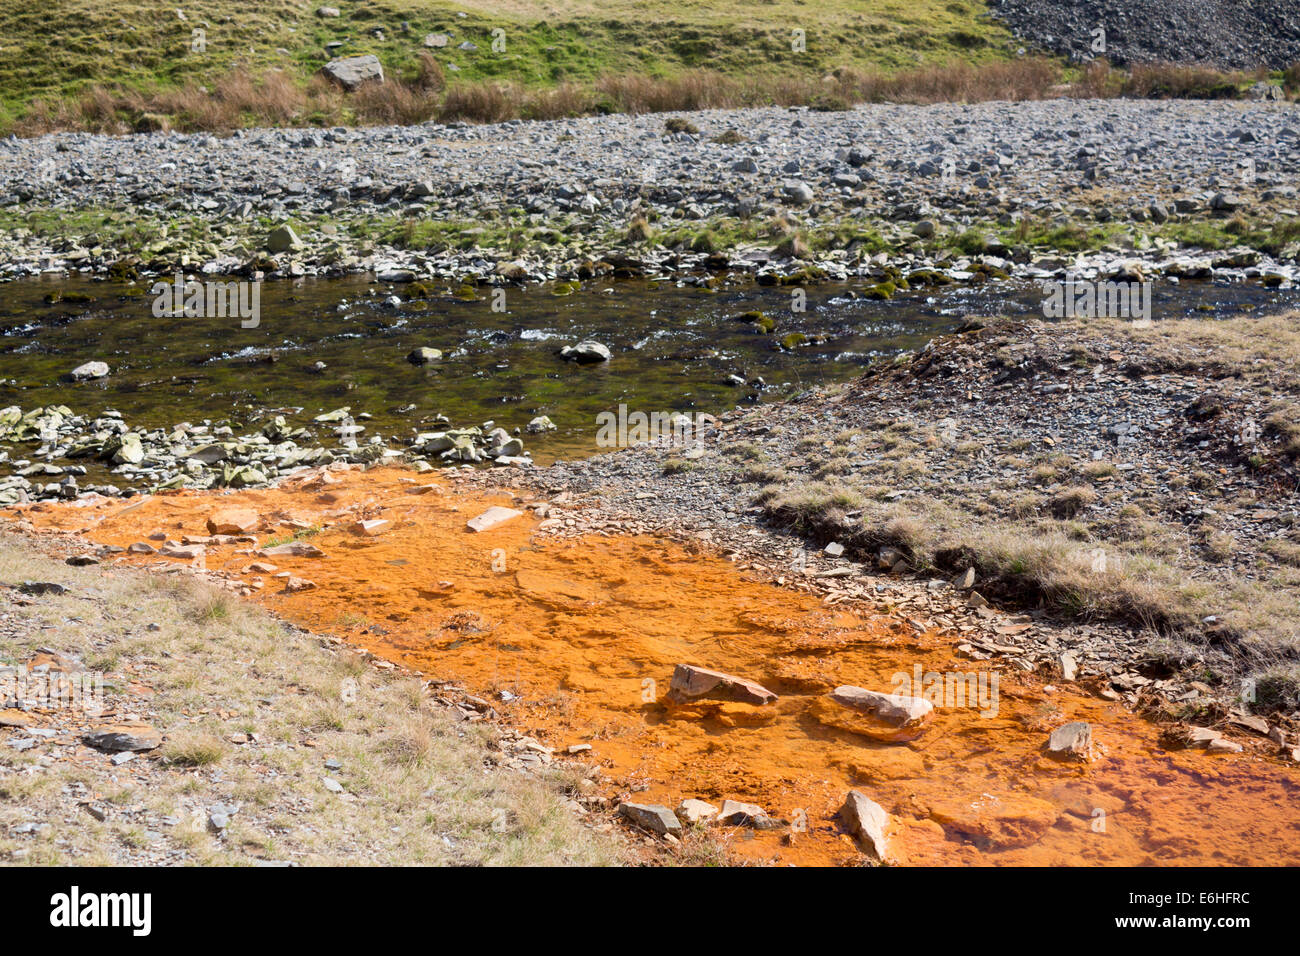 Polluted contaminated water flowing from stream from abandoned lead mine into river with clean water Cwmystwyth Mid Wales UK Stock Photo